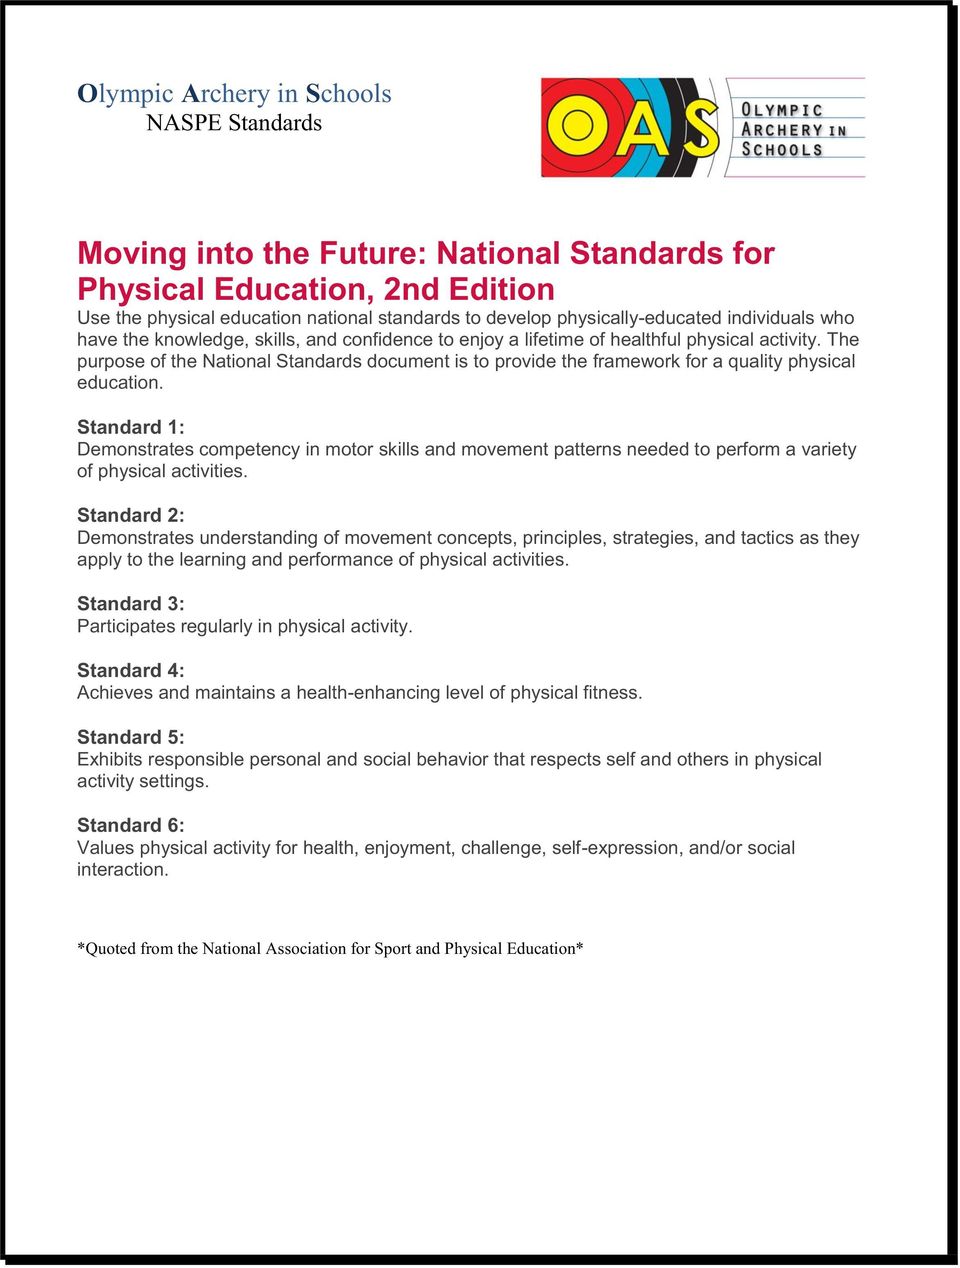 The purpose of the National Standards document is to provide the framework for a quality physical education.